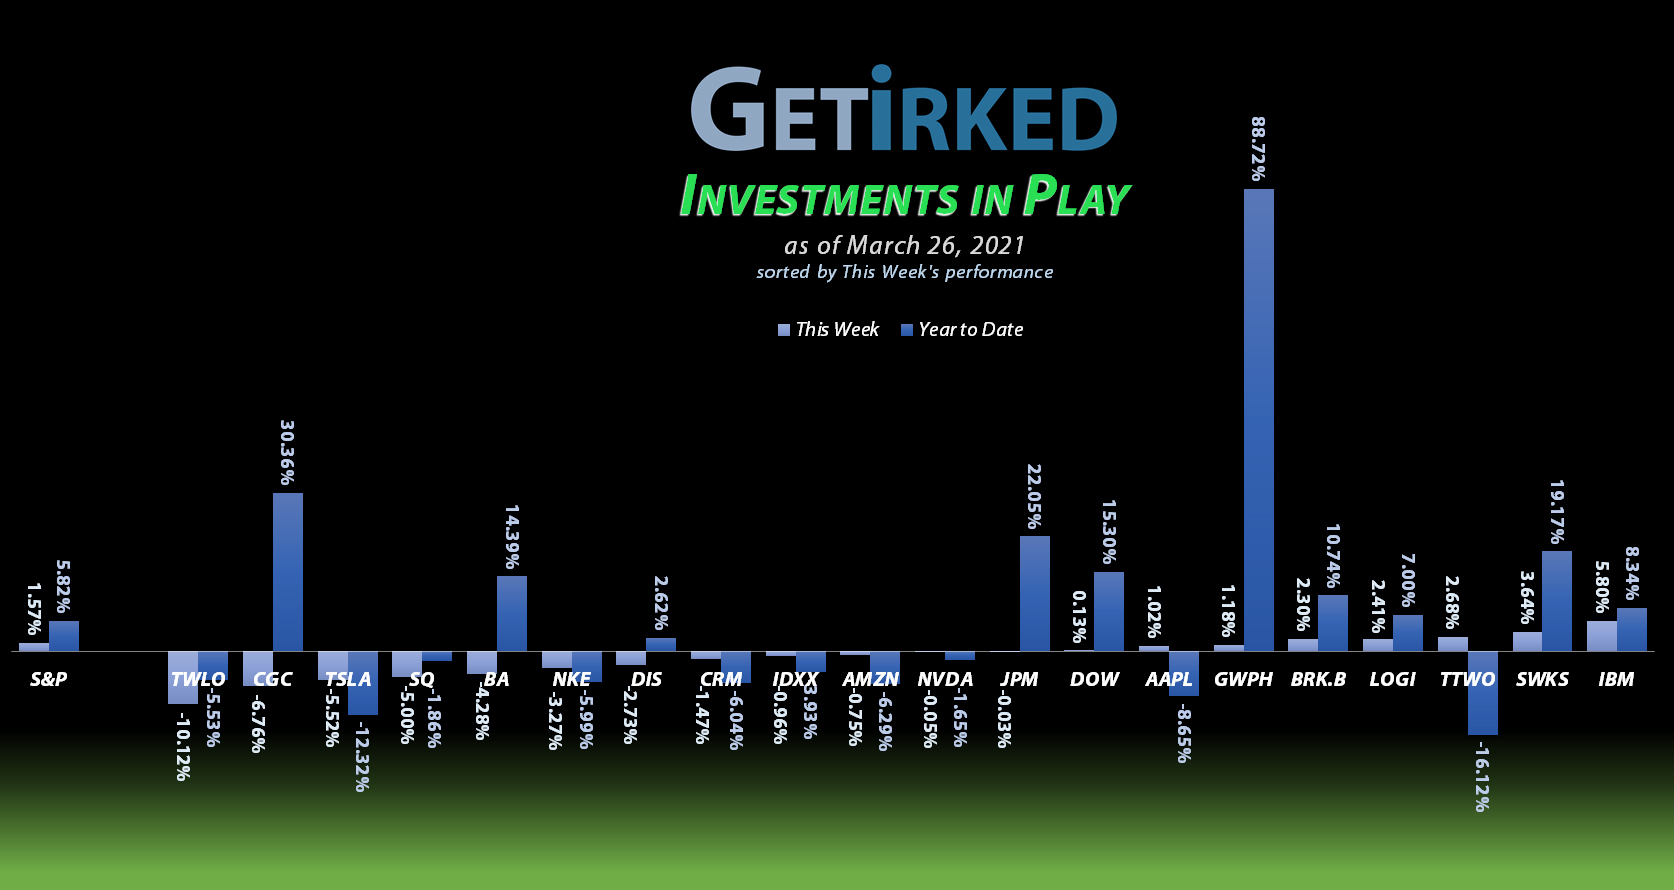 Get Irked - Investments in Play - March 26, 2021